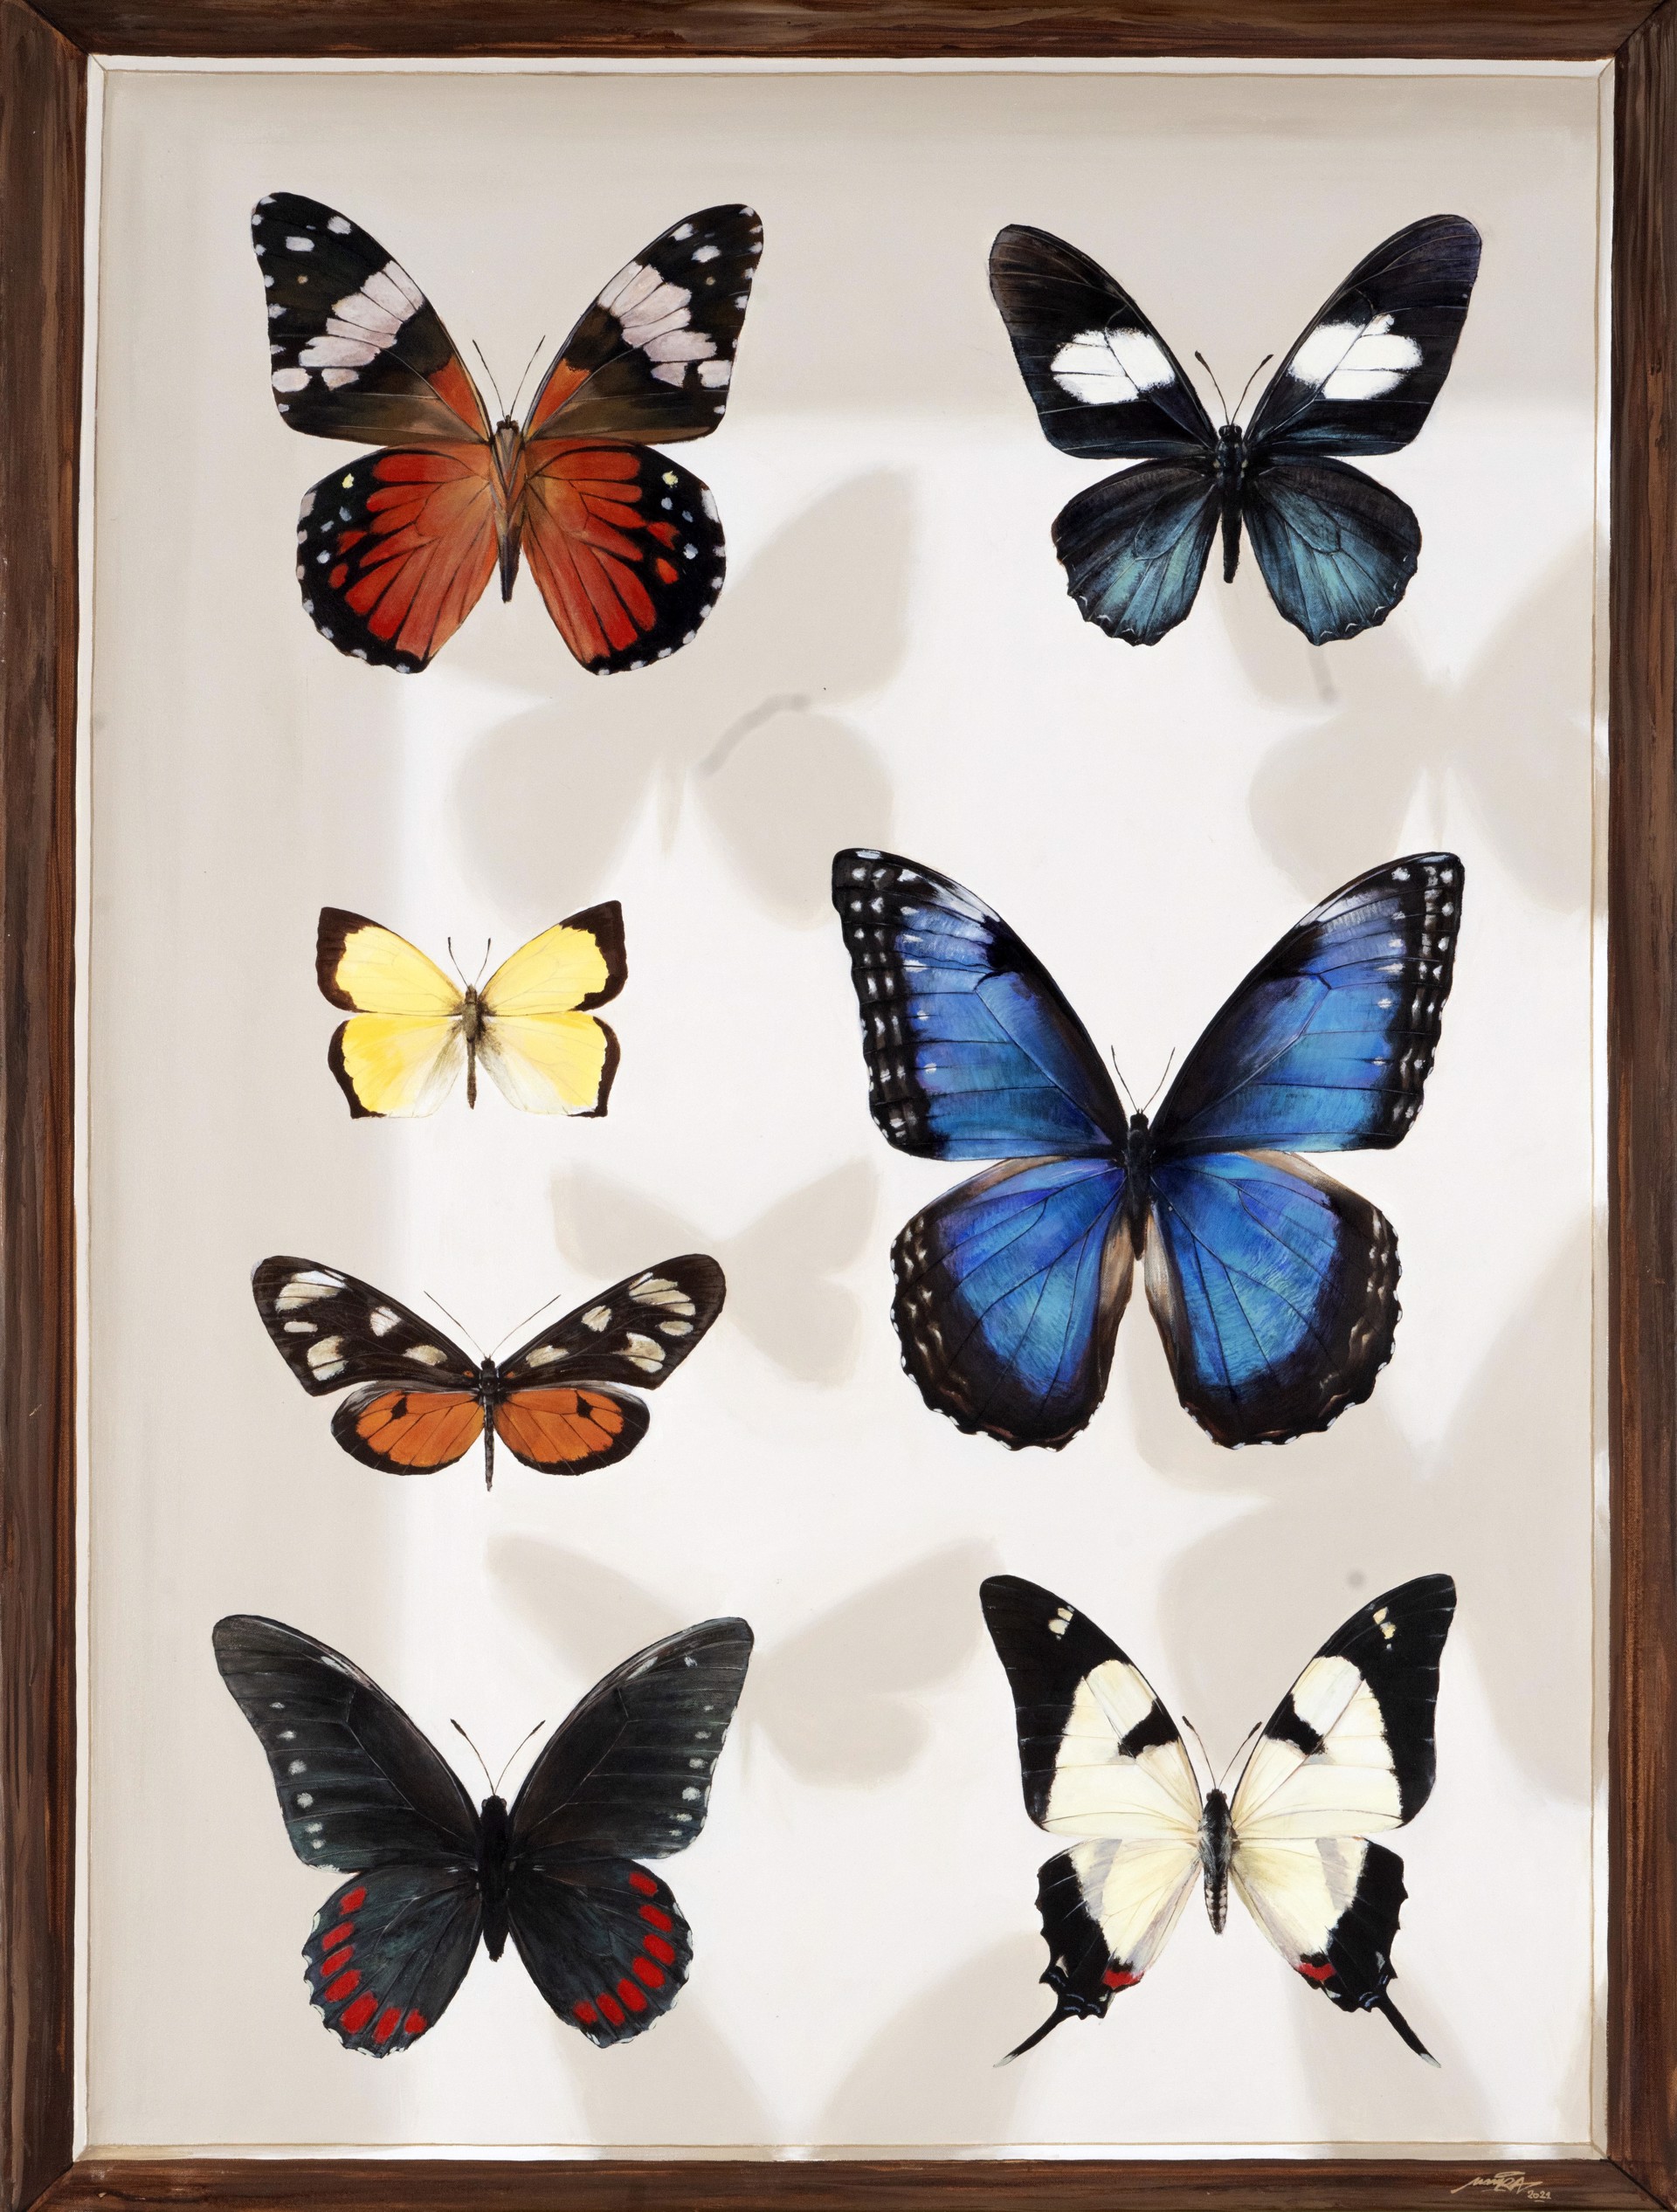 Butterflies of Mexico - Board 1 by Youri Cansell aka Mantra